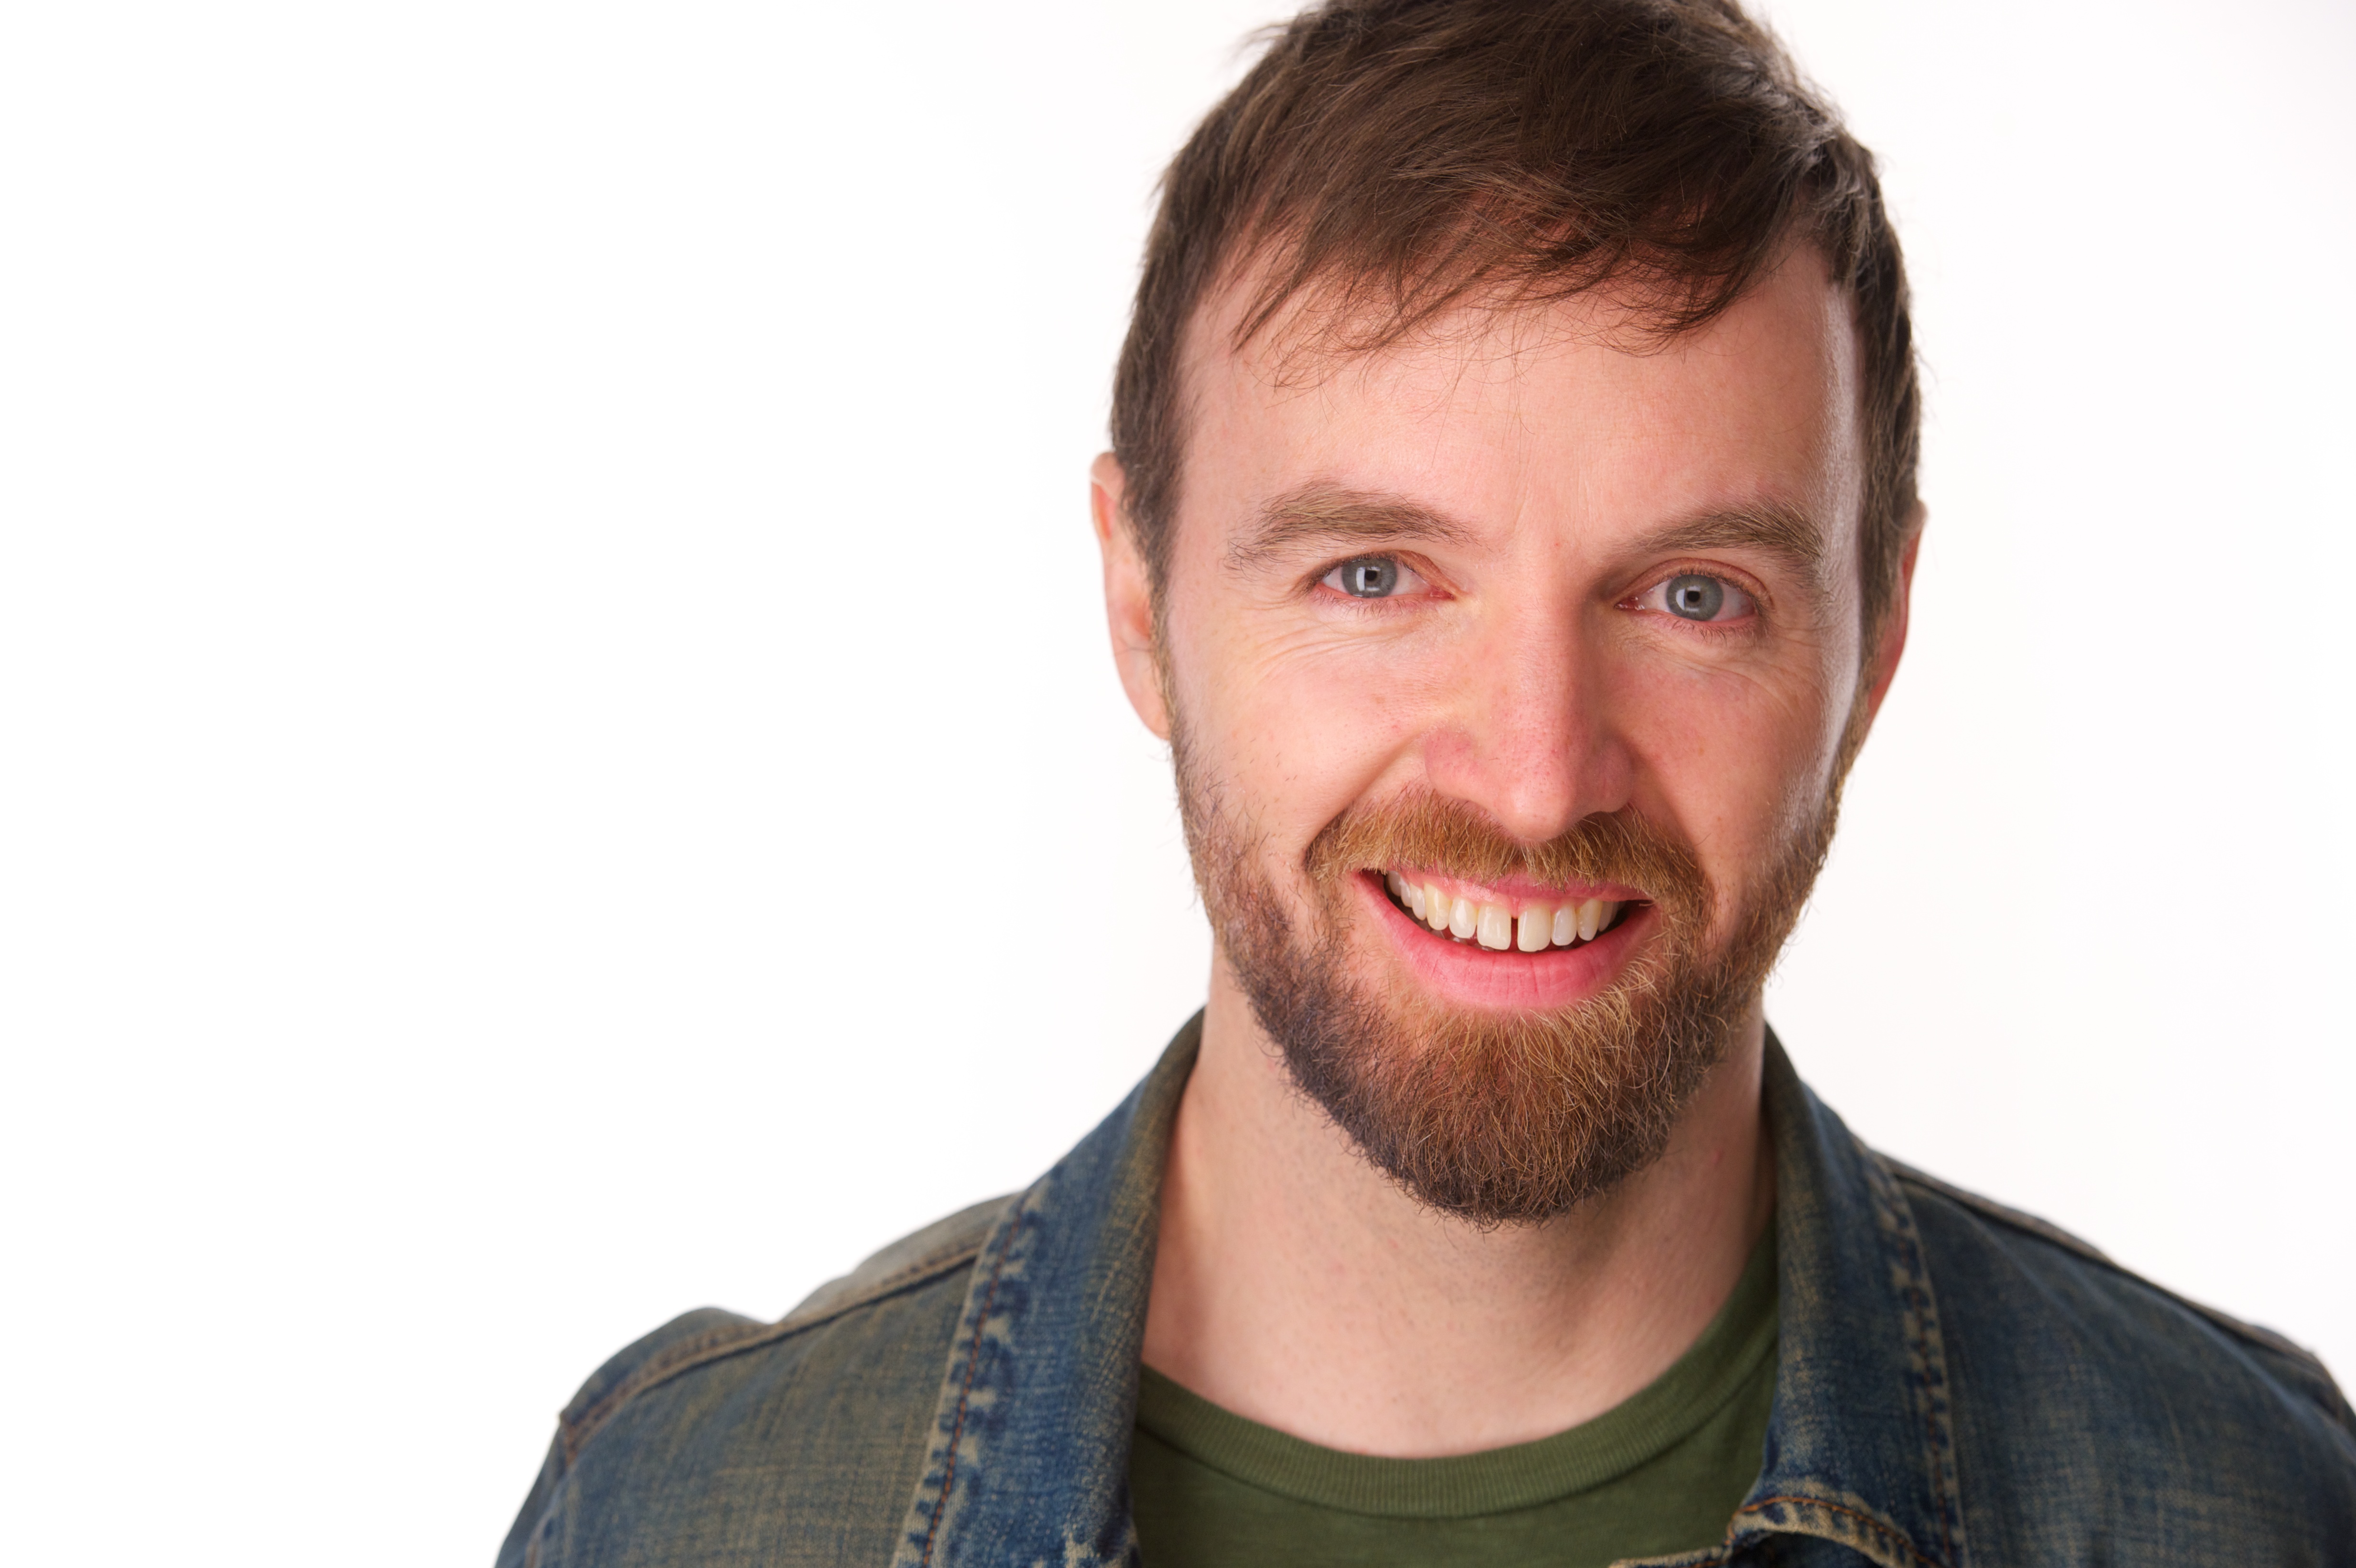 Jay Dunn is former professional blackjack card counter with an MIT crew offshoot, Brooklyn-based actor and Lecoq-trained devising performer who creates original, outrageous and beautiful physical comedy in theater and film.